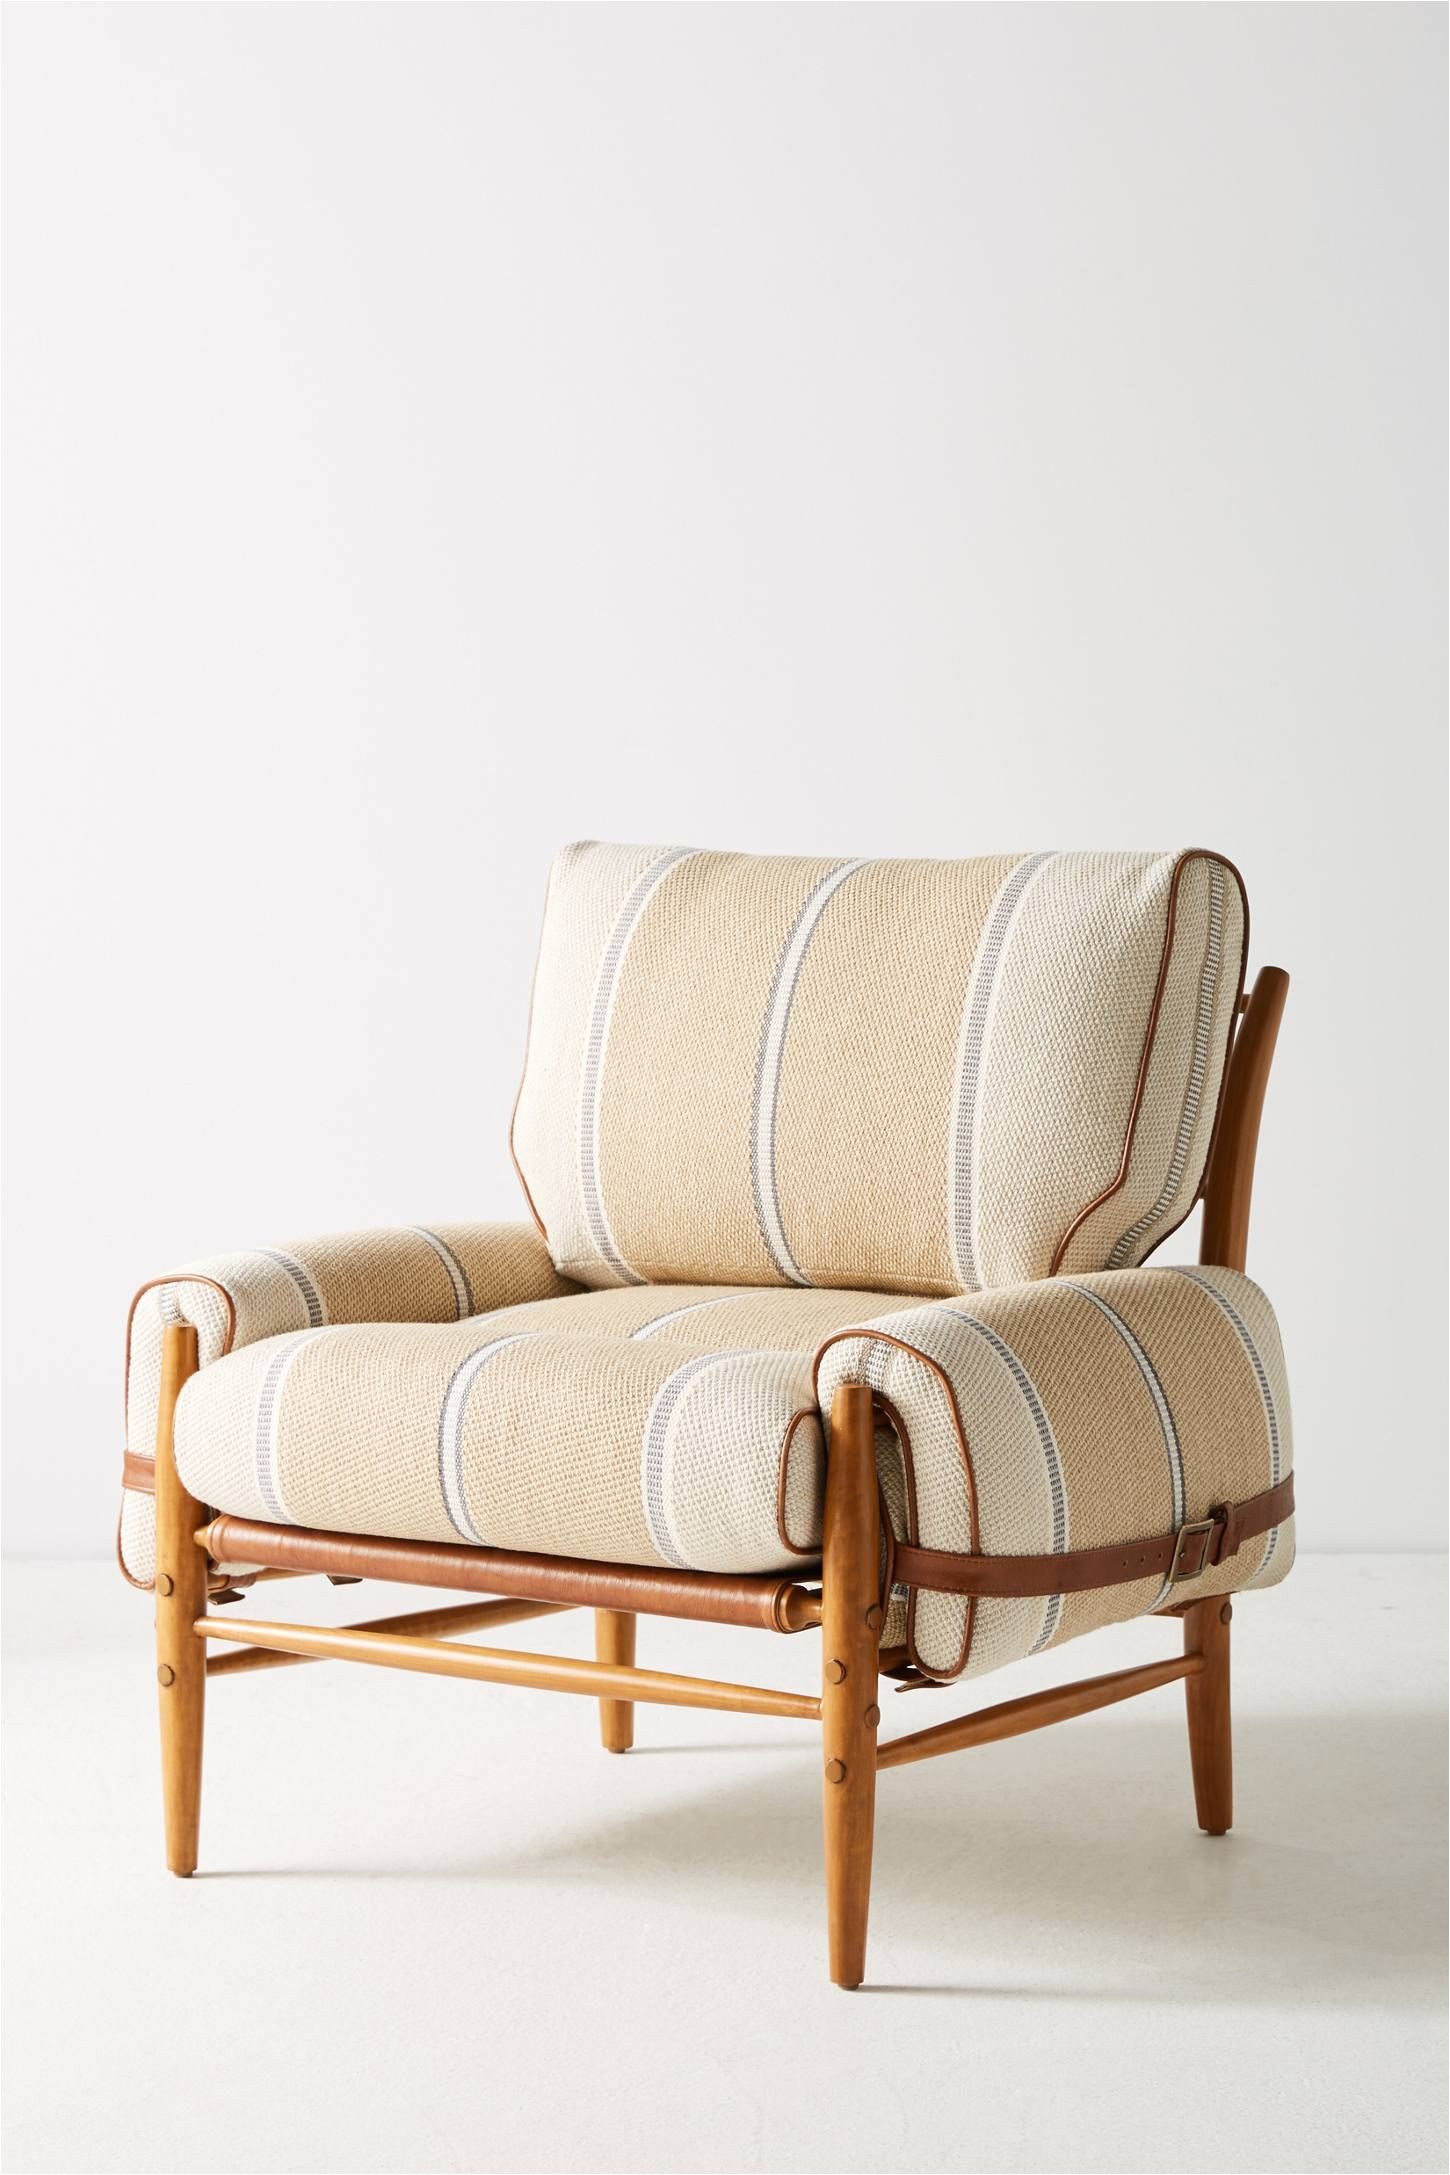 shop the peruvian stripe rhys chair and more anthropologie at anthropologie today read customer reviews discover product details and more